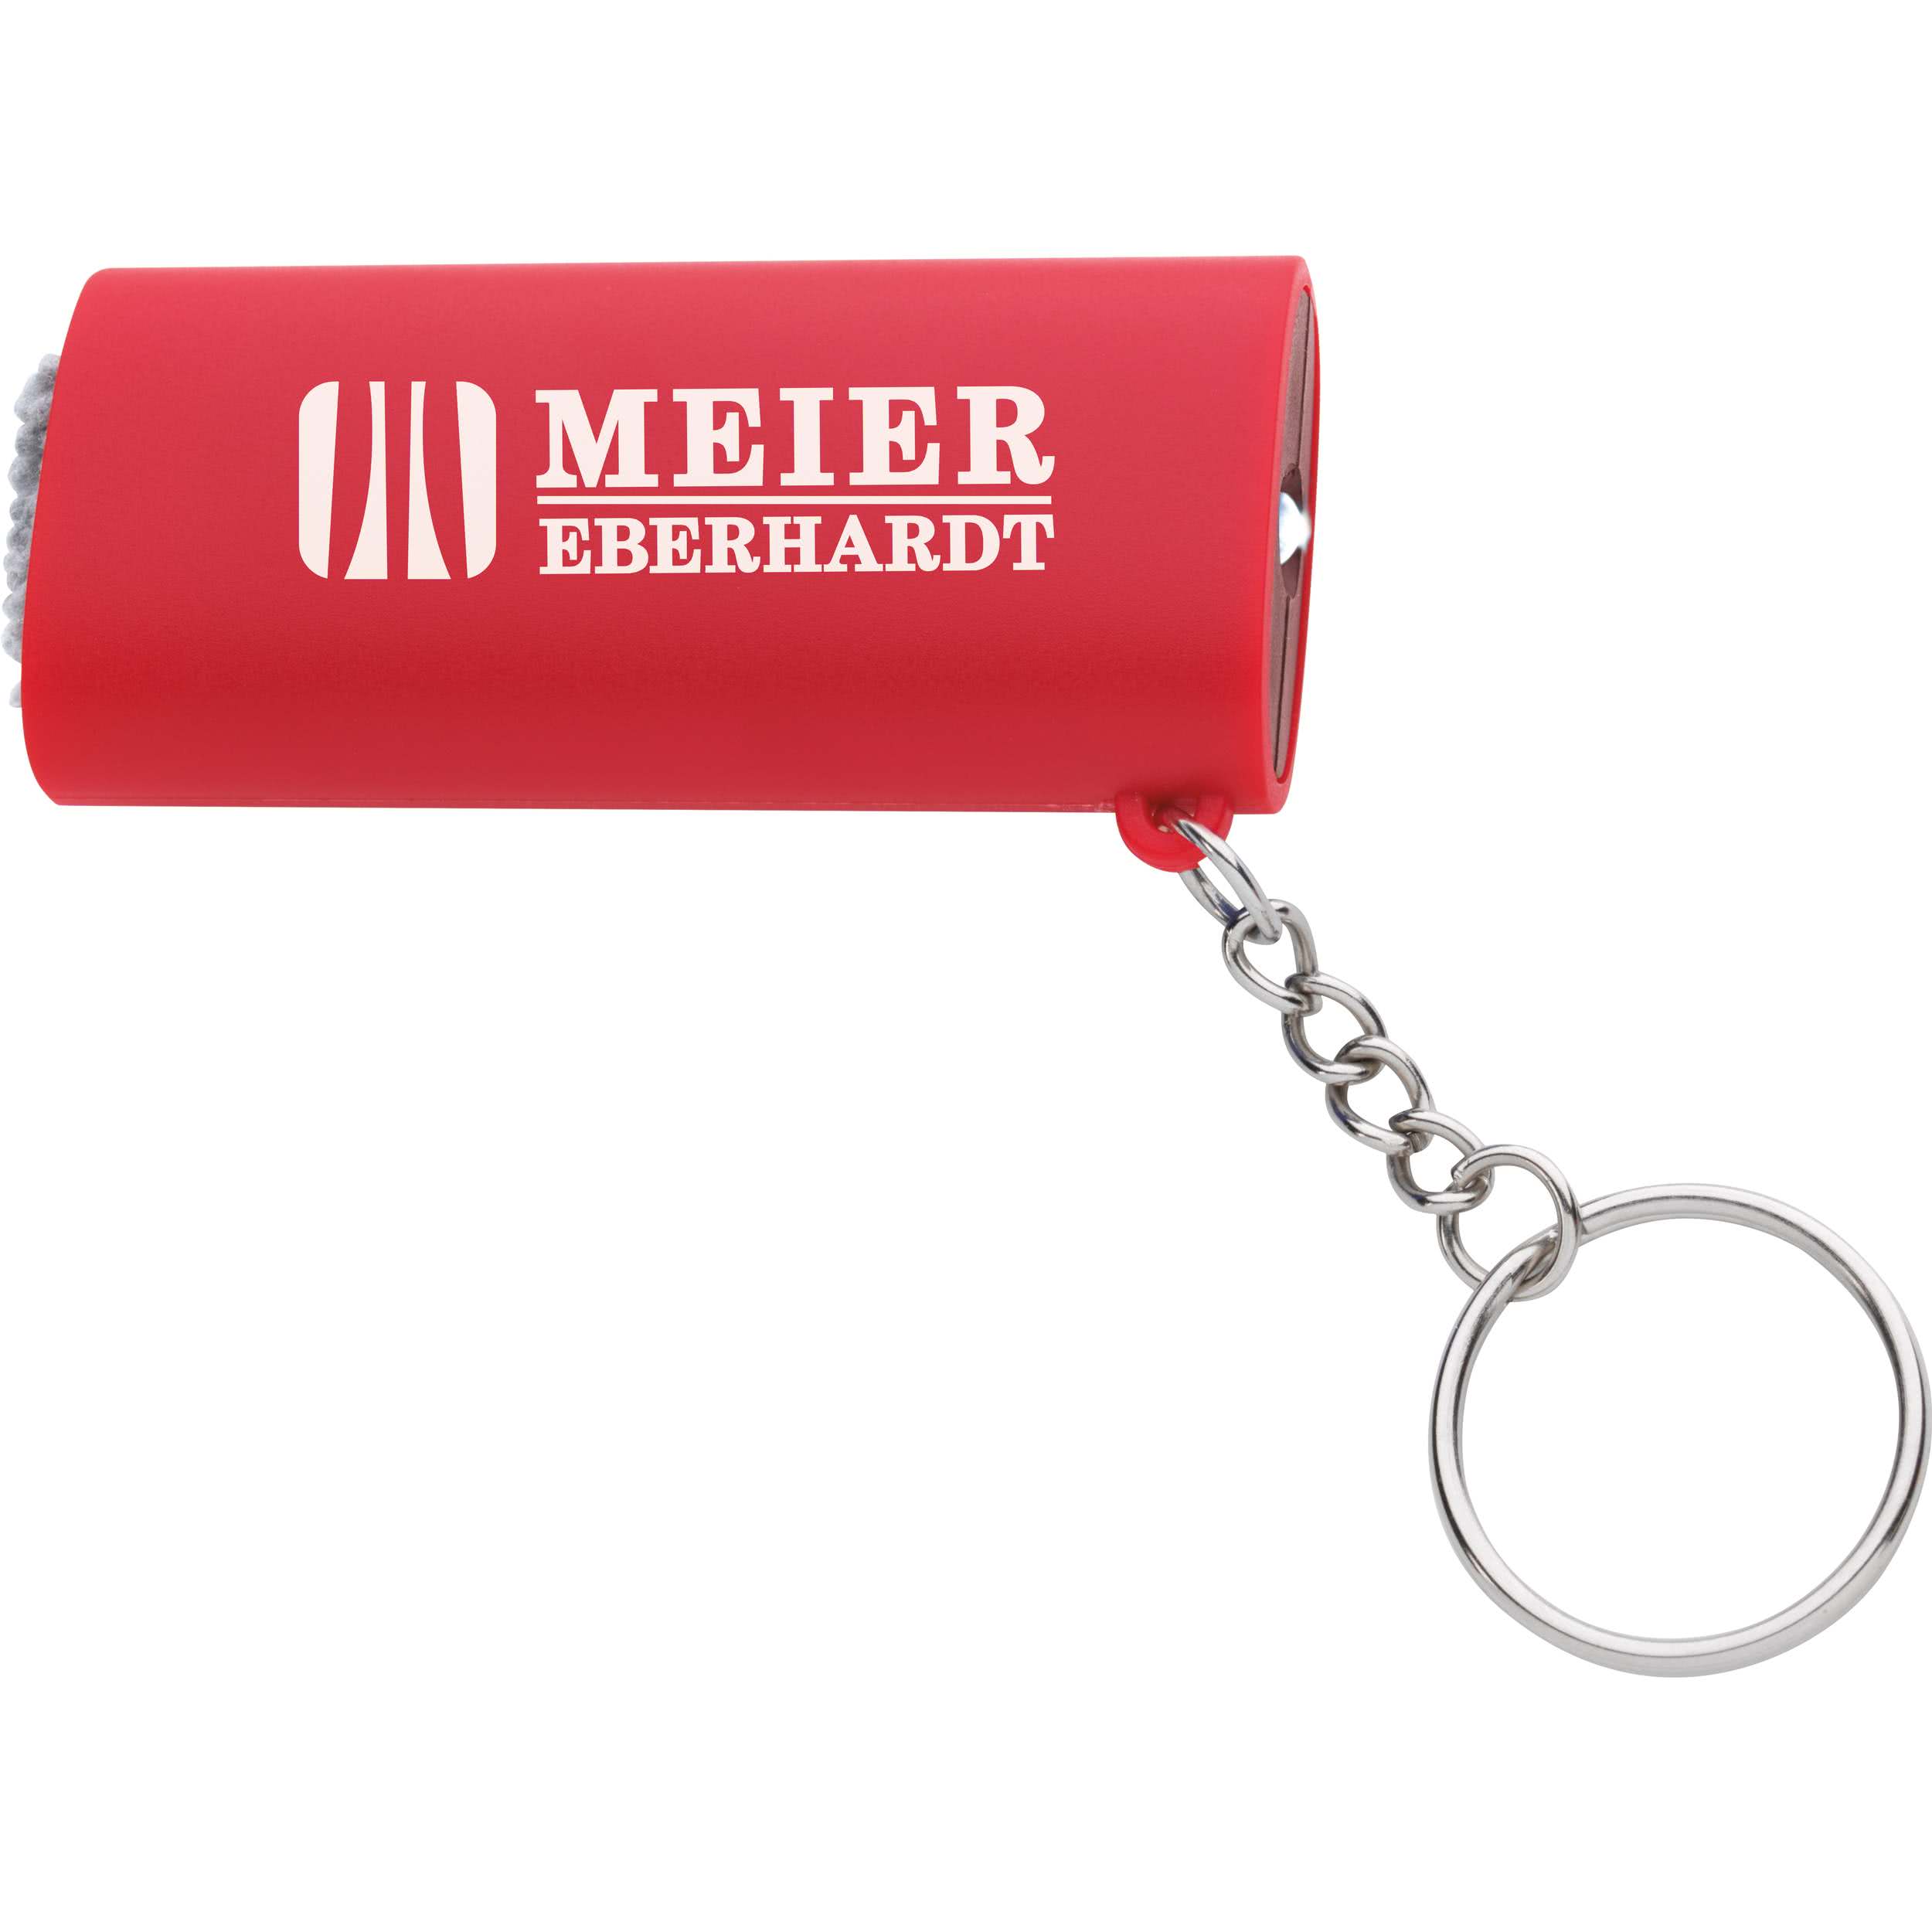 Oblong Red Logo - Promotional Oblong Tech Keylights with Custom Logo for $1.79 Ea.